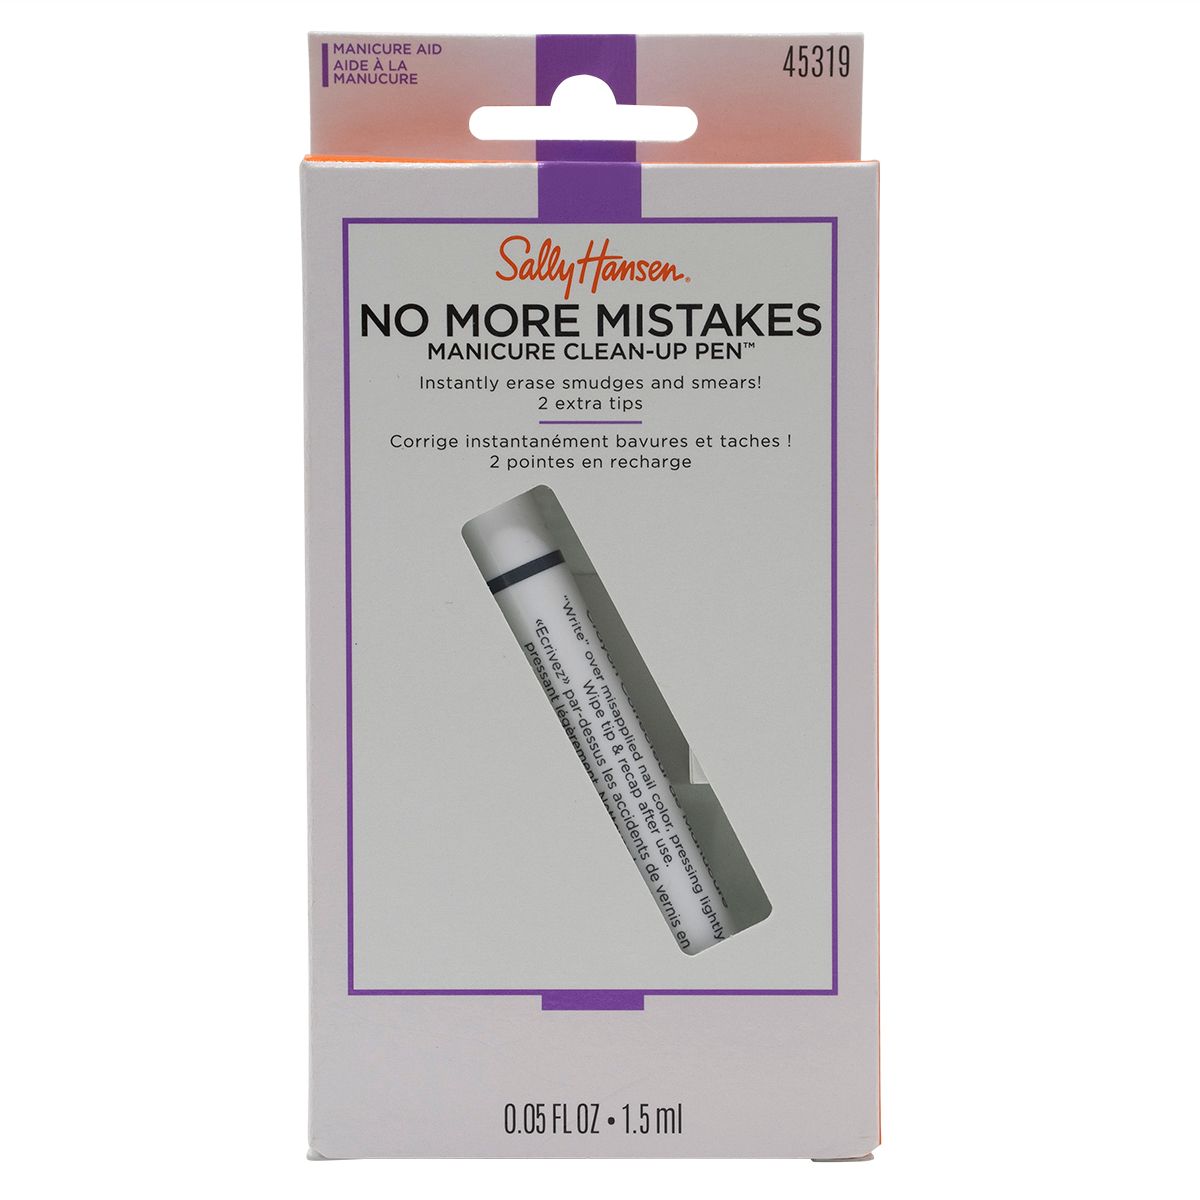 No More Mistakes Manicure Cleanup Pen